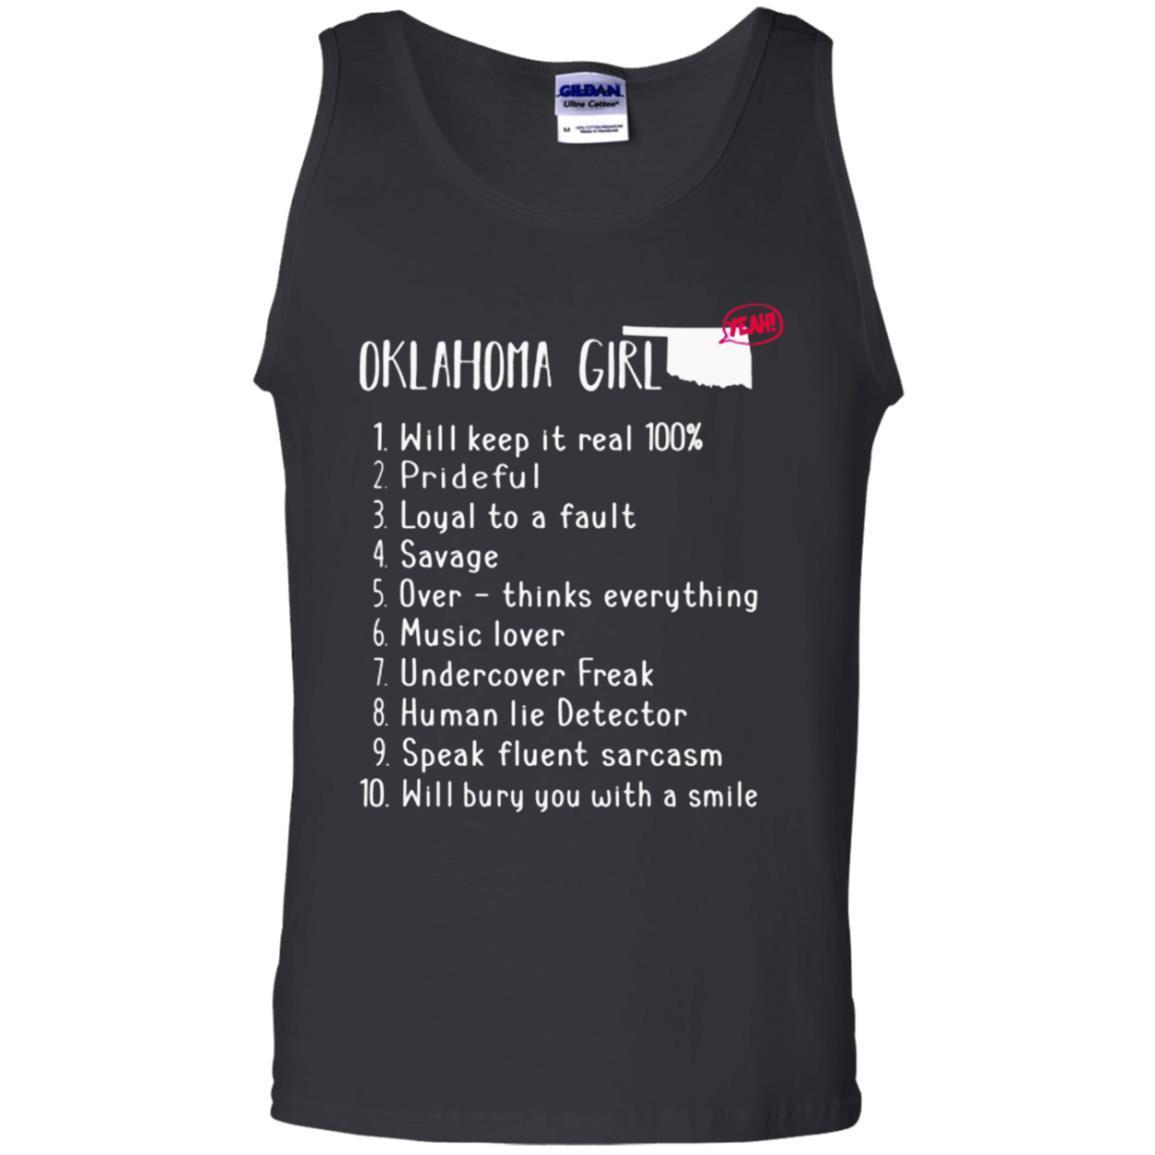 High Quality Oklahoma Girl Will Keep It Real What She Can Do Tank Top Shirts